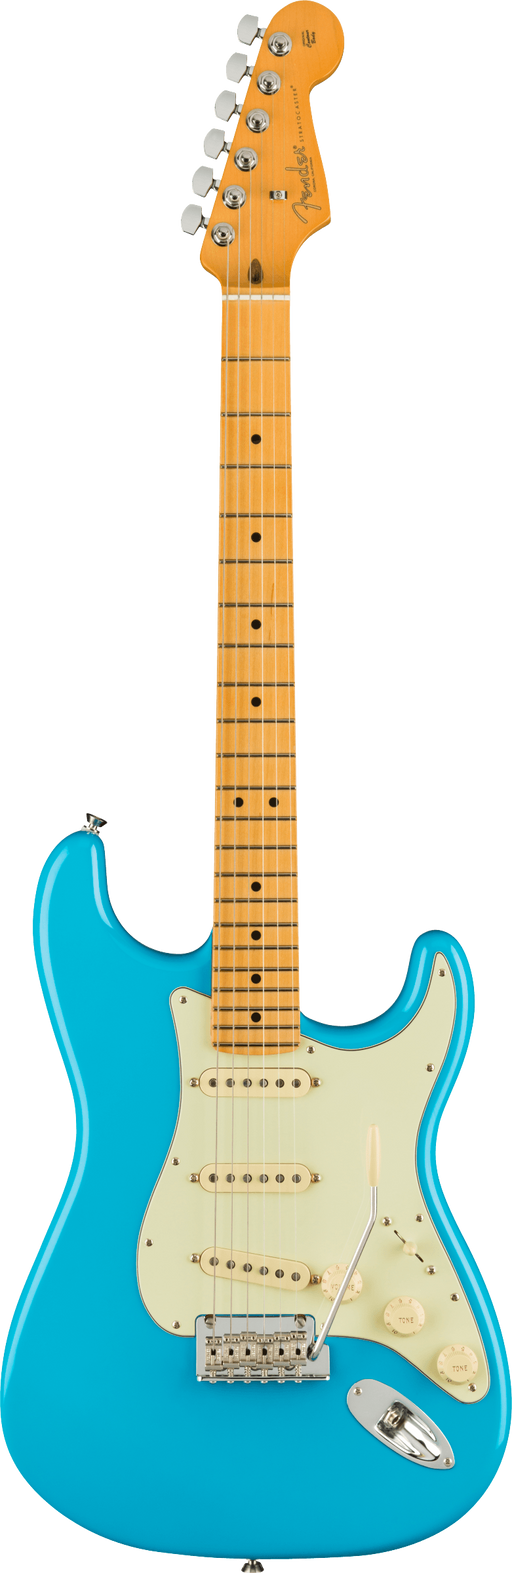 Fender American Professional II Stratocaster Maple Fingerboard Miami Blue Electric Guitar With Case